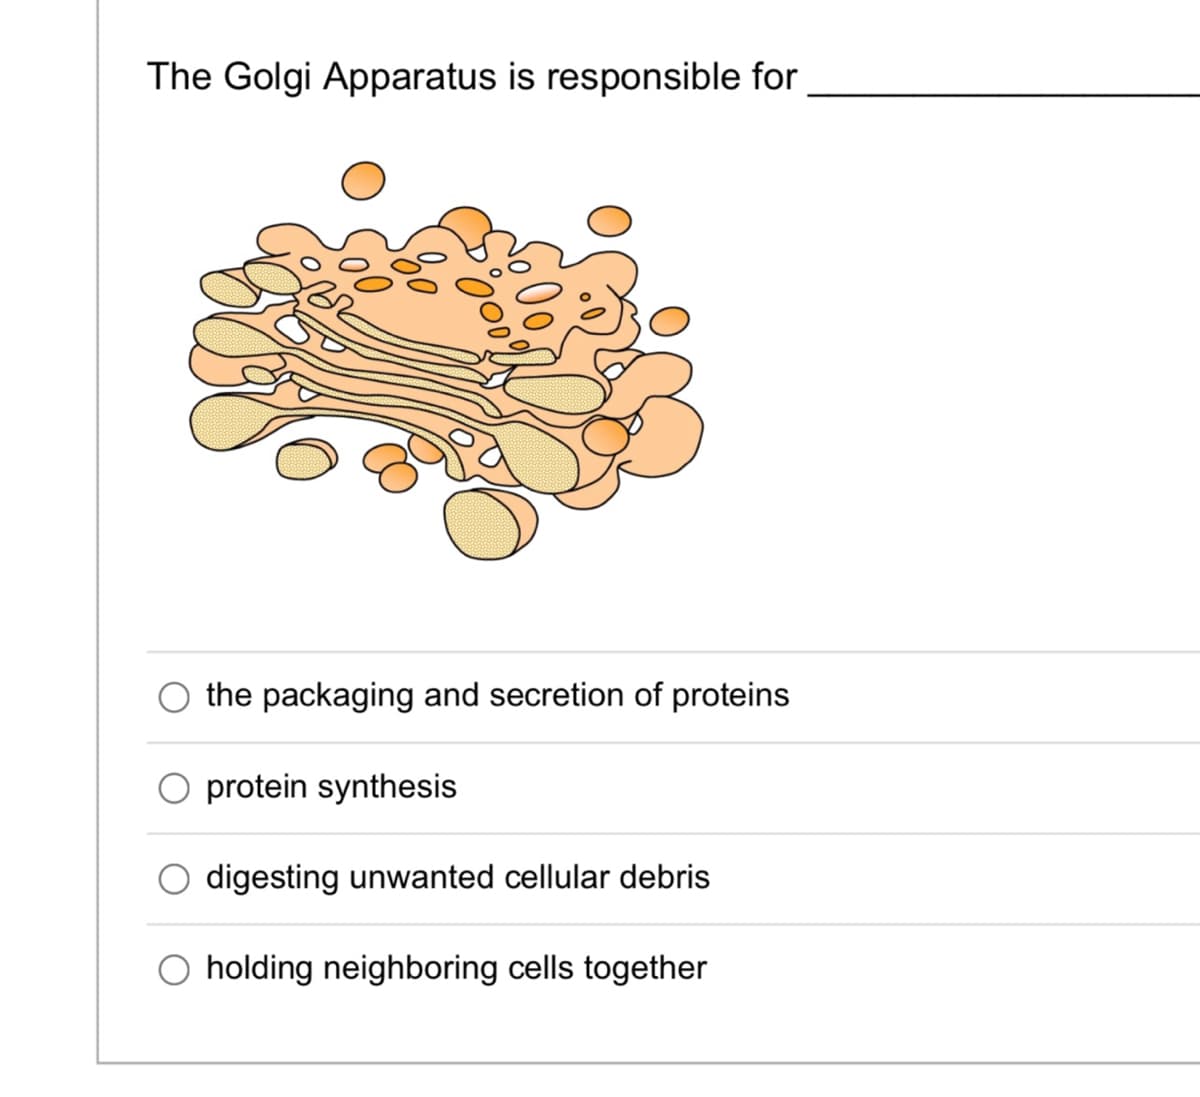 The Golgi Apparatus is responsible for
the packaging and secretion of proteins
protein synthesis
O digesting unwanted cellular debris
O holding neighboring cells together
